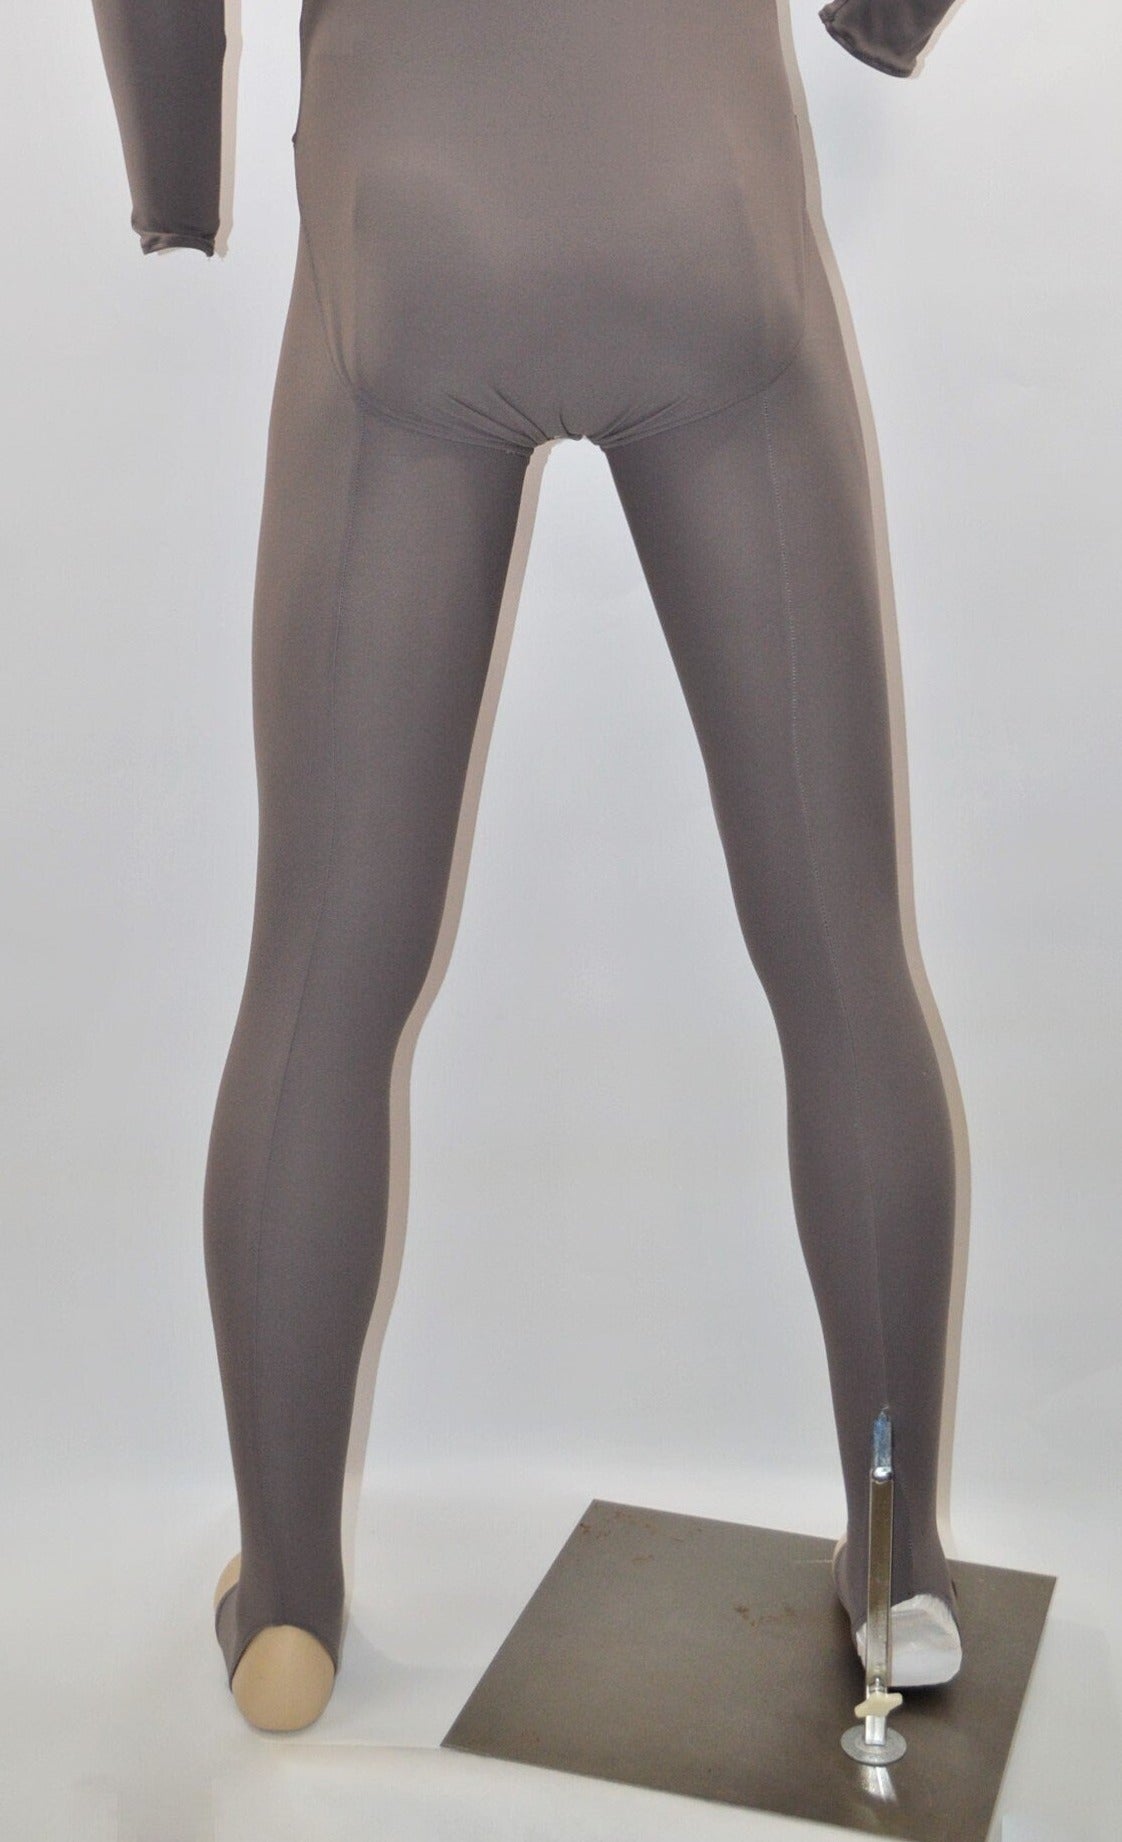 Superhero Tights in WS2 Bat Gray with stirrup foot and seams up the back